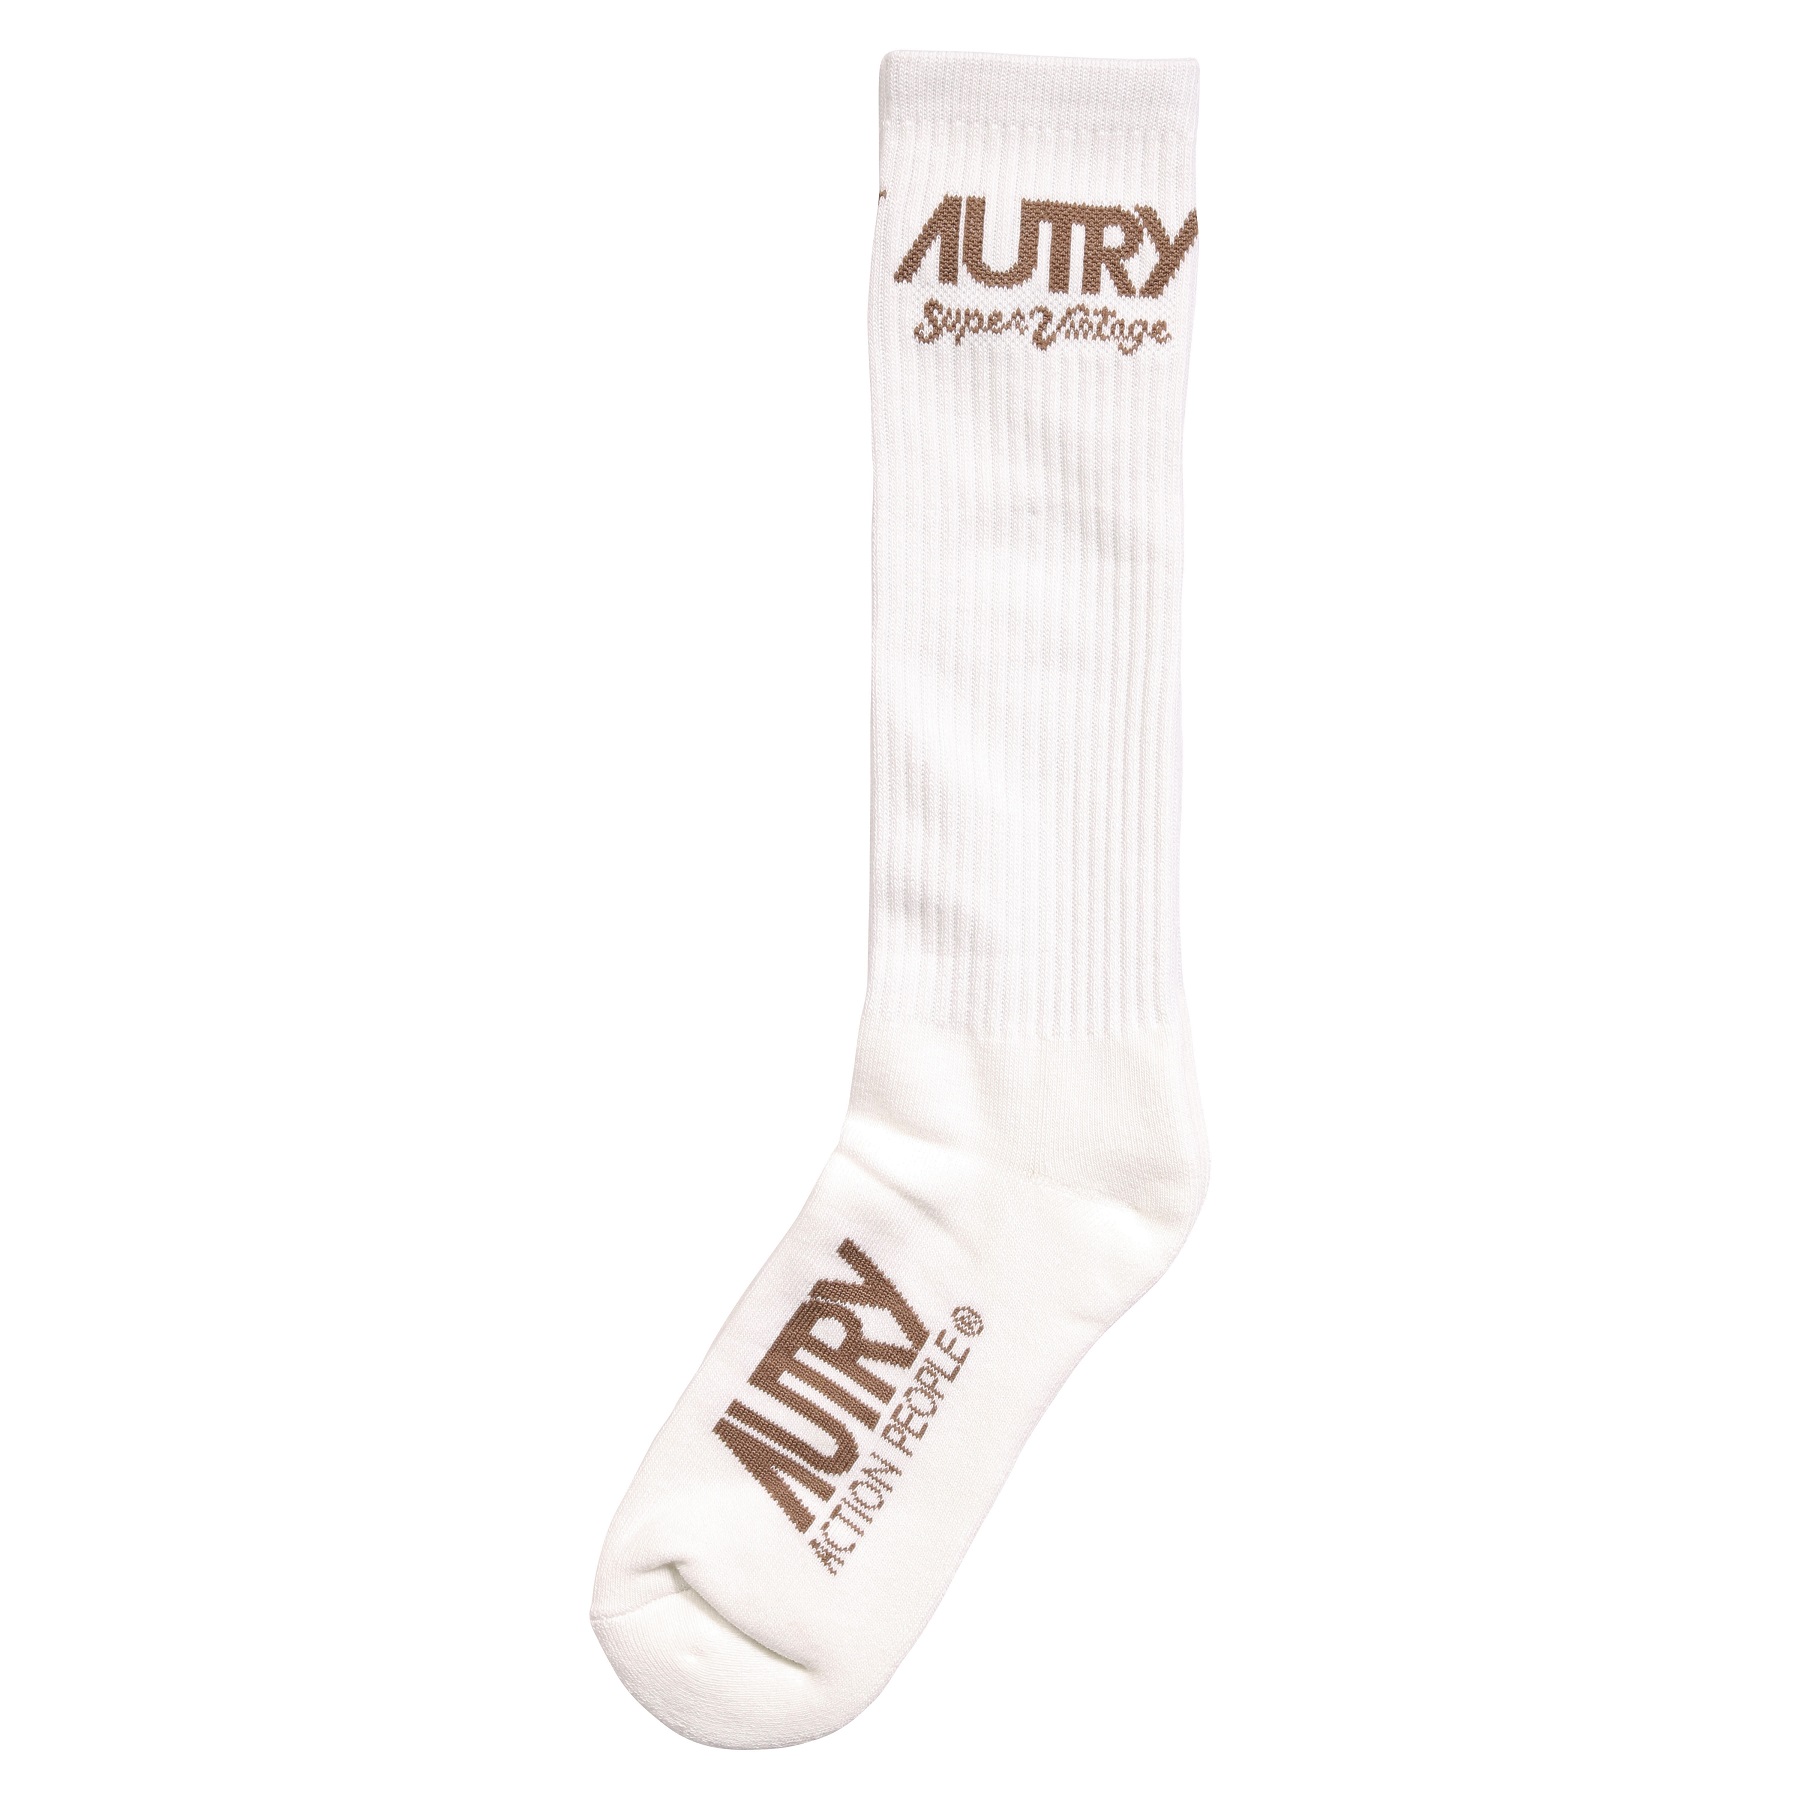 Autry Action Shoes Socks Supervintage Tinto White S/35-38